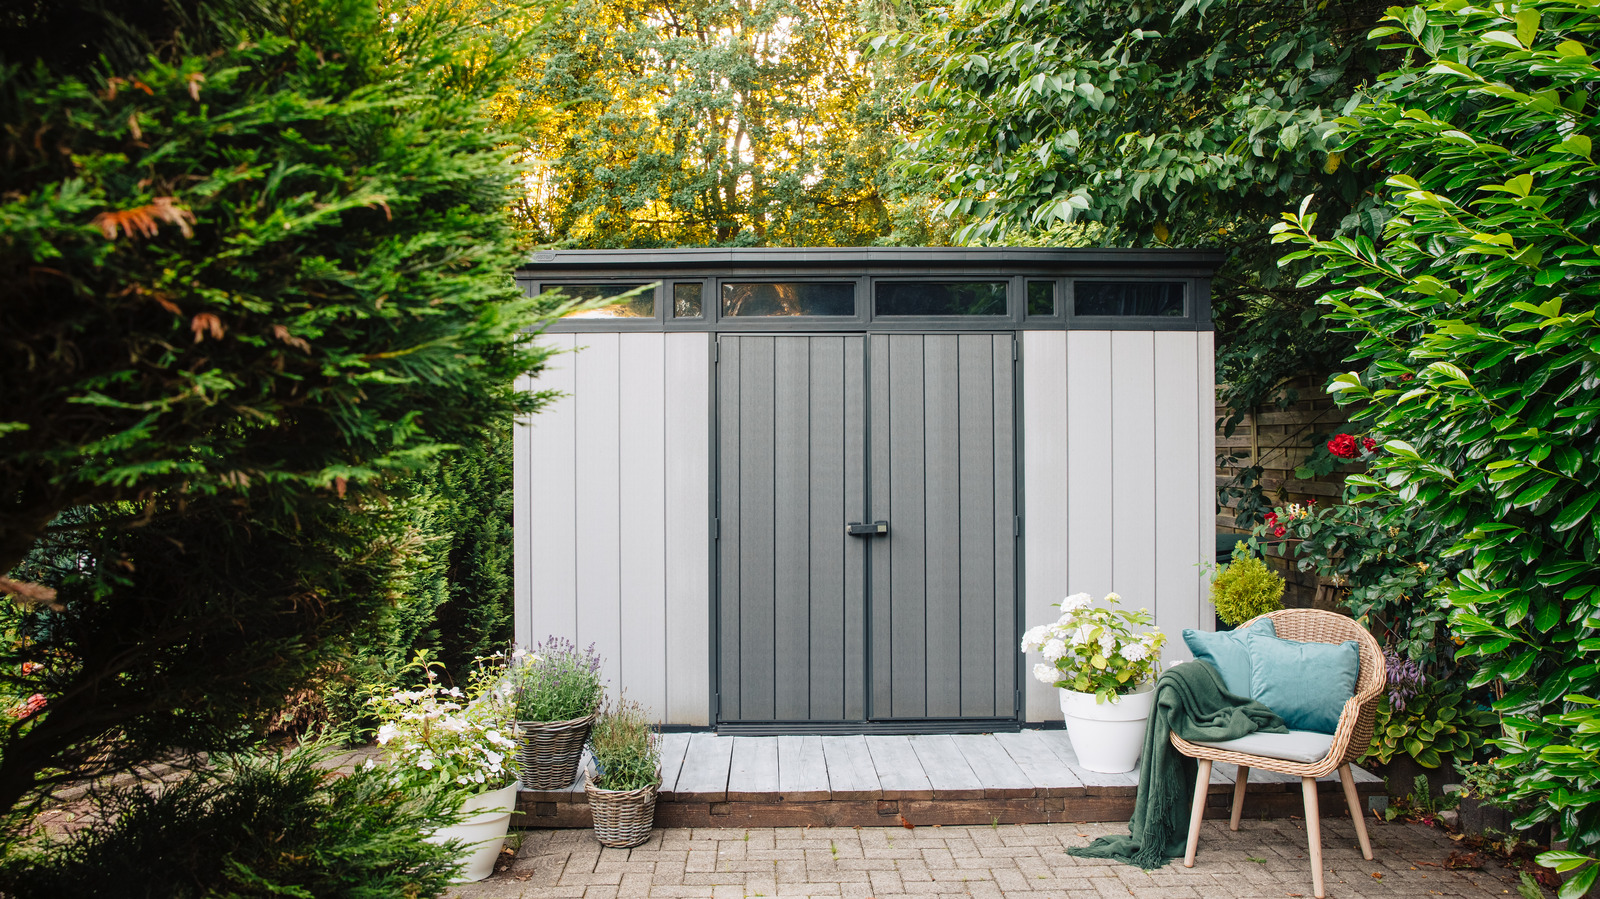 https://www.housedigest.com/img/gallery/15-tips-to-build-your-own-diy-shed/l-intro-1639418559.jpg